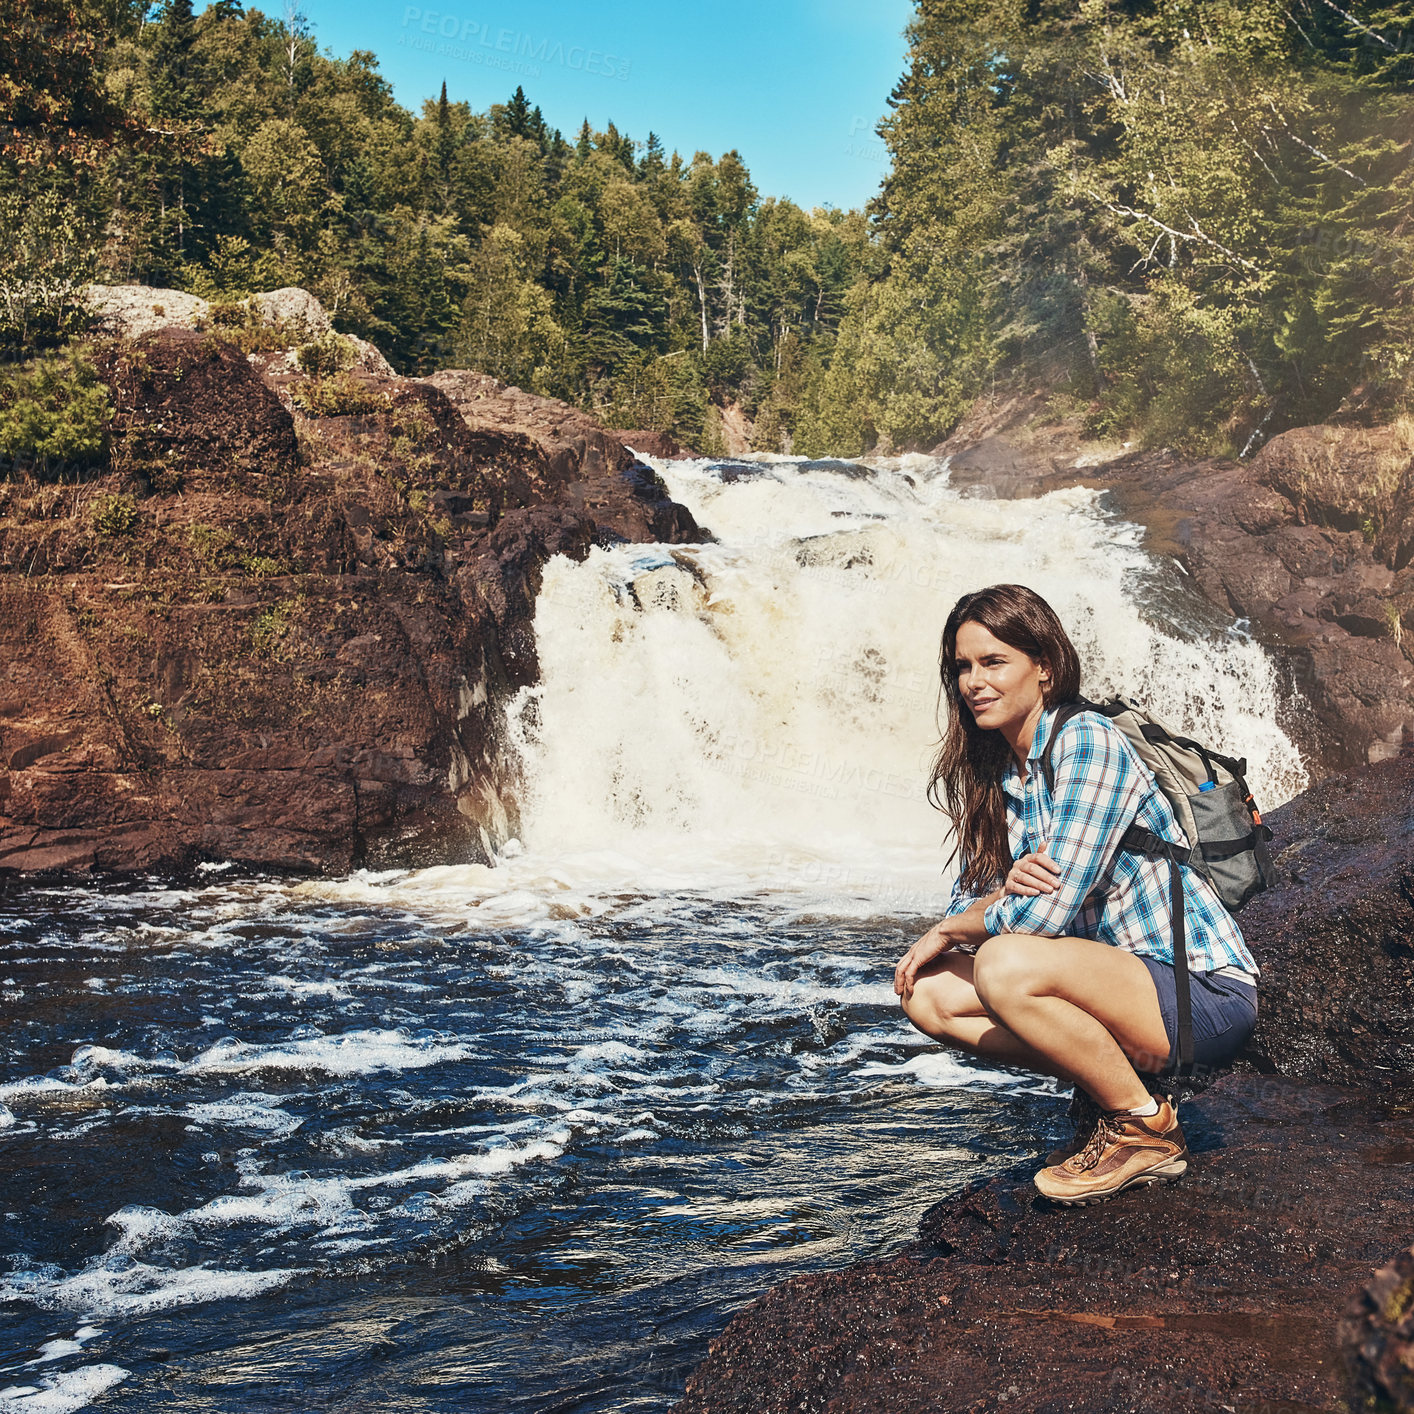 Buy stock photo Shot of an attractive young woman crouching next to a rocky river and waterfall